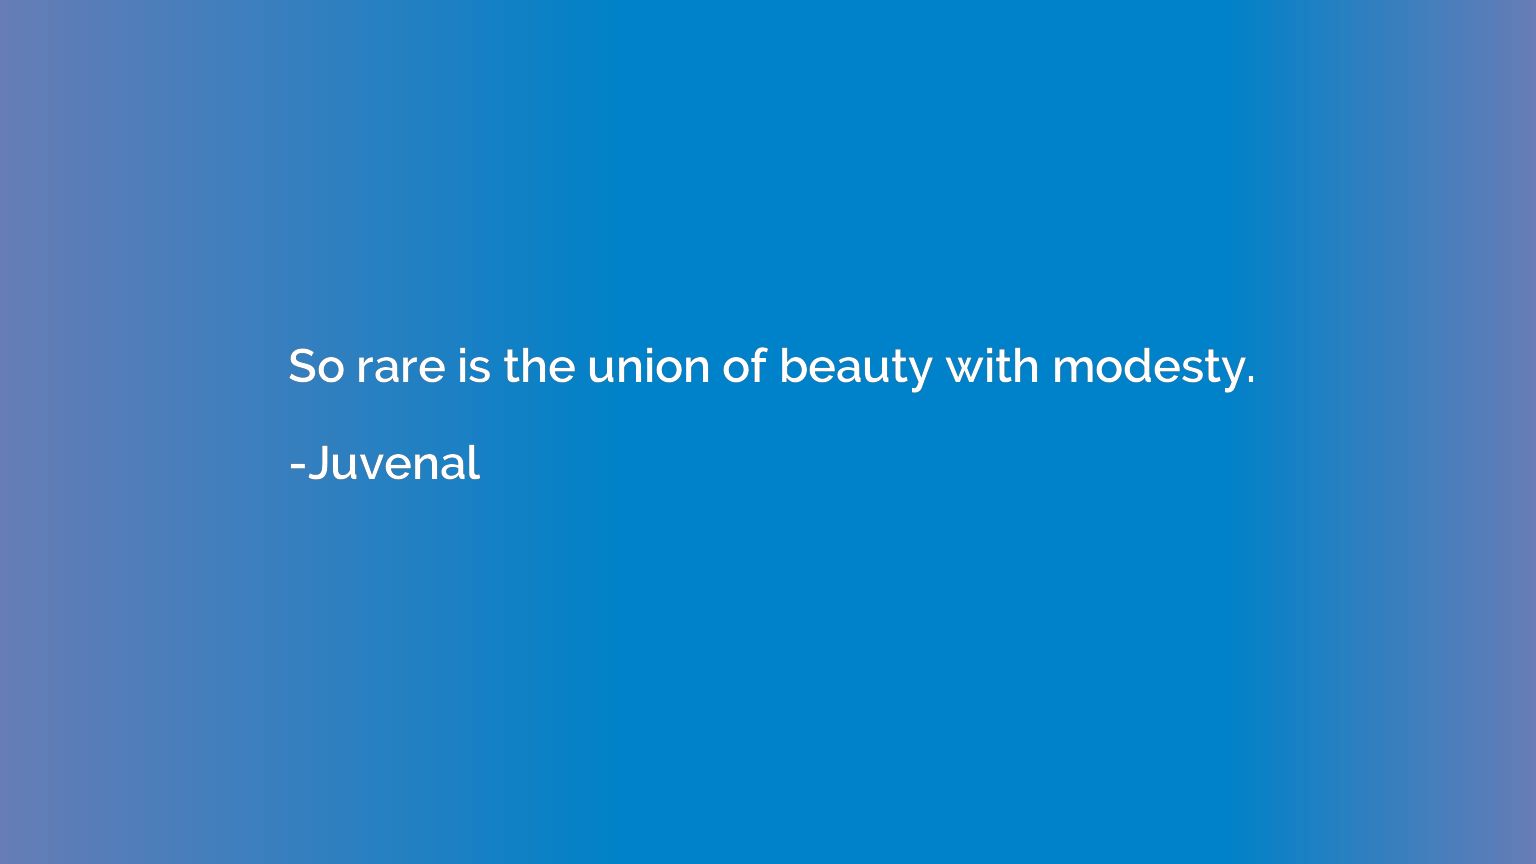 So rare is the union of beauty with modesty.